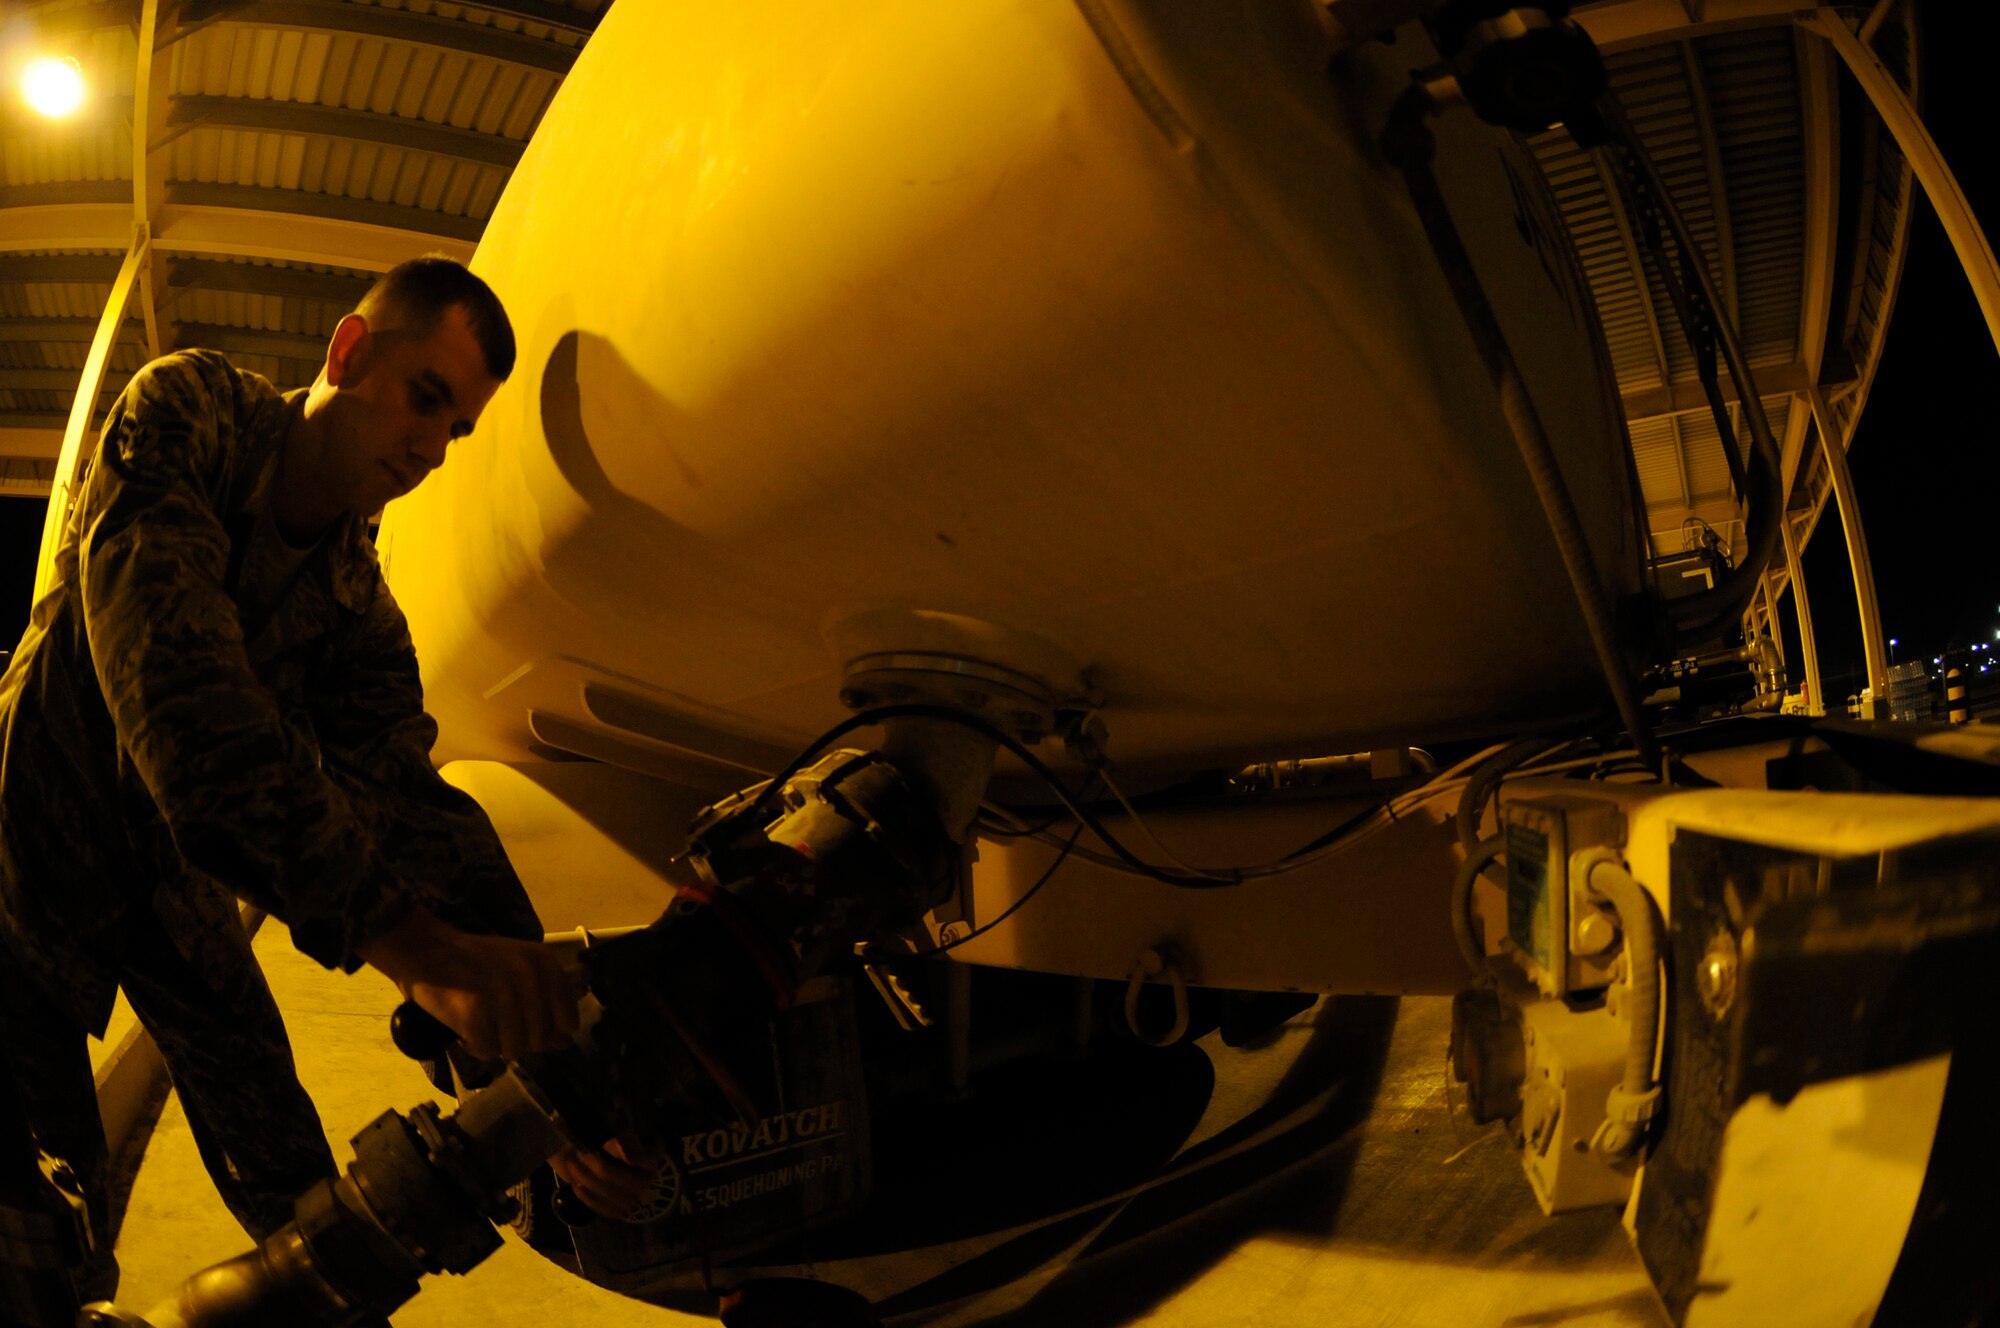 Airman 1st Class Deron Hix, fuels apprentice assigned to the 379th Expeditionary Logistics Readiness Squadron, uses a pantograph extension to fill an R-11 refueling truck so it can refuel aircraft Nov. 5, at an undisclosed air base in Southwest Asia. These 379th ELRS members fuel the fight by transferring approximately one million gallons of jet fuel per day, keeping all aircraft fueled and prepared for flight to support the Global War on Terrorism. Airman Hix, a native of Indianapolis, Ind., is deployed from Moody Air Force Base, Ga., in support of Operations Iraqi and Enduring Freedom and Joint Task Force-Horn of Africa. (U.S. Air Force photo by Staff Sgt. Darnell T. Cannady/Released)